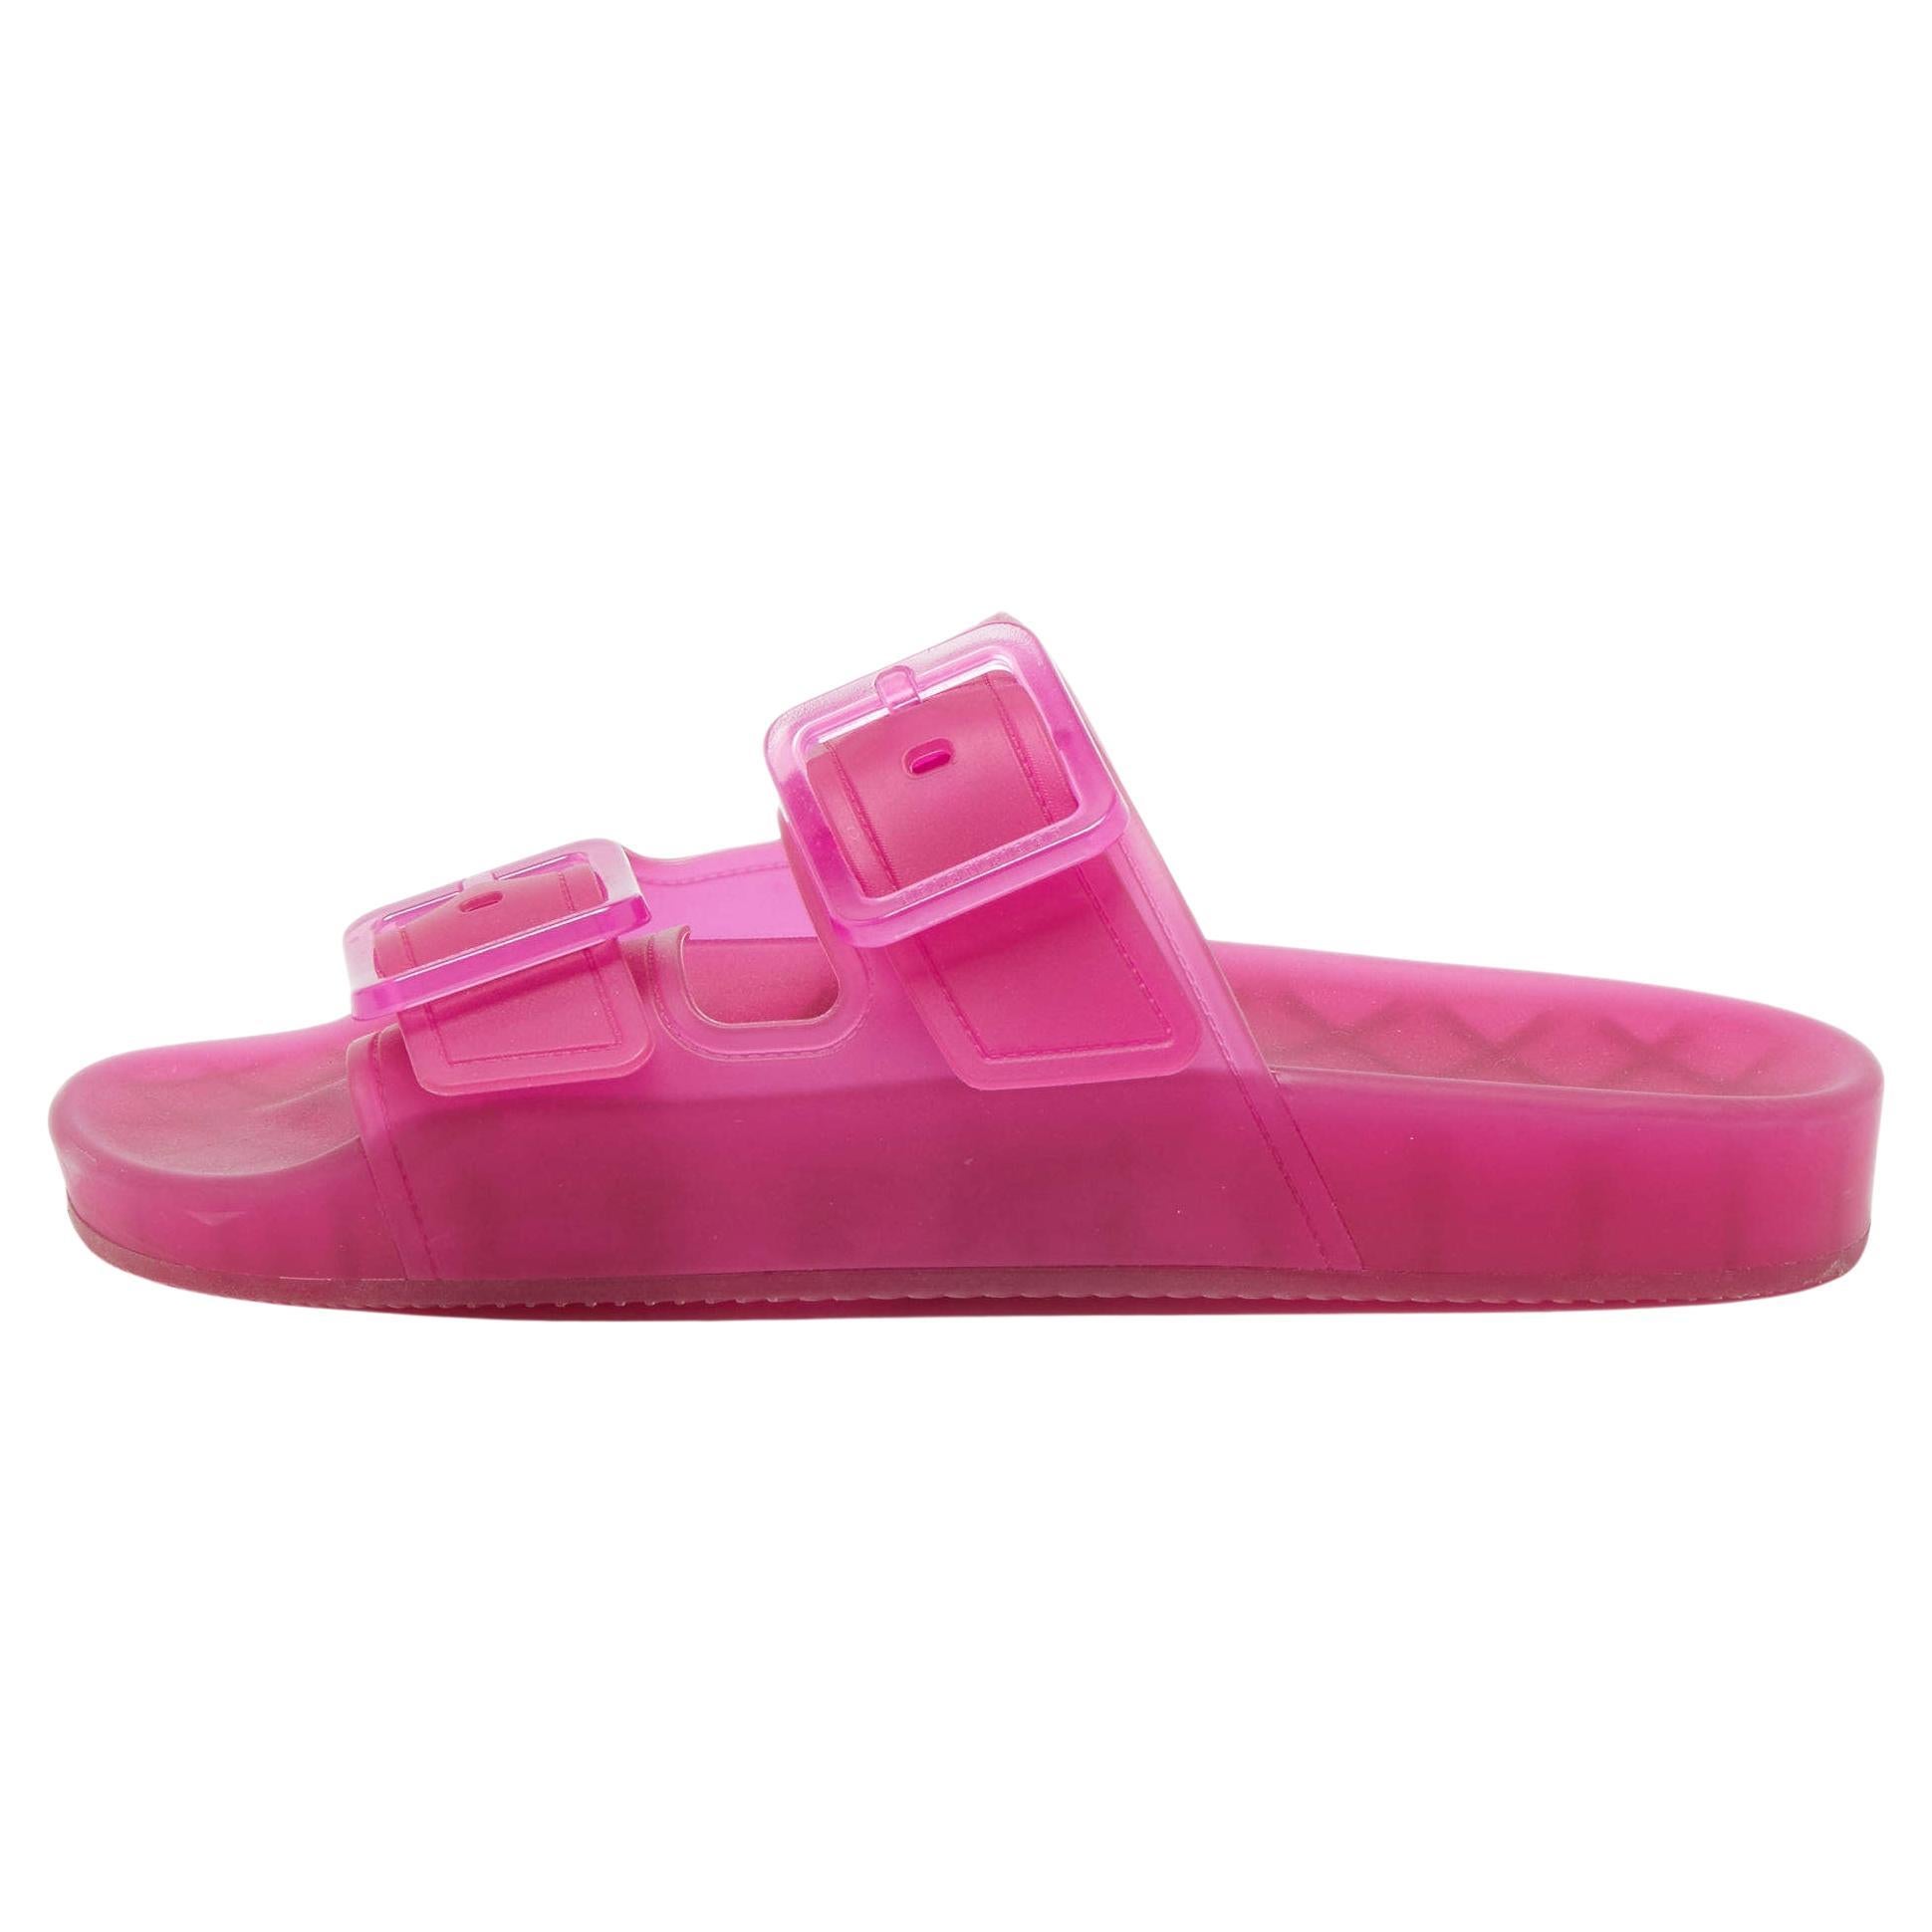 Balenciaga Pink Rubber Double Buckle Detail Flat Sandals Size 38 For Sale